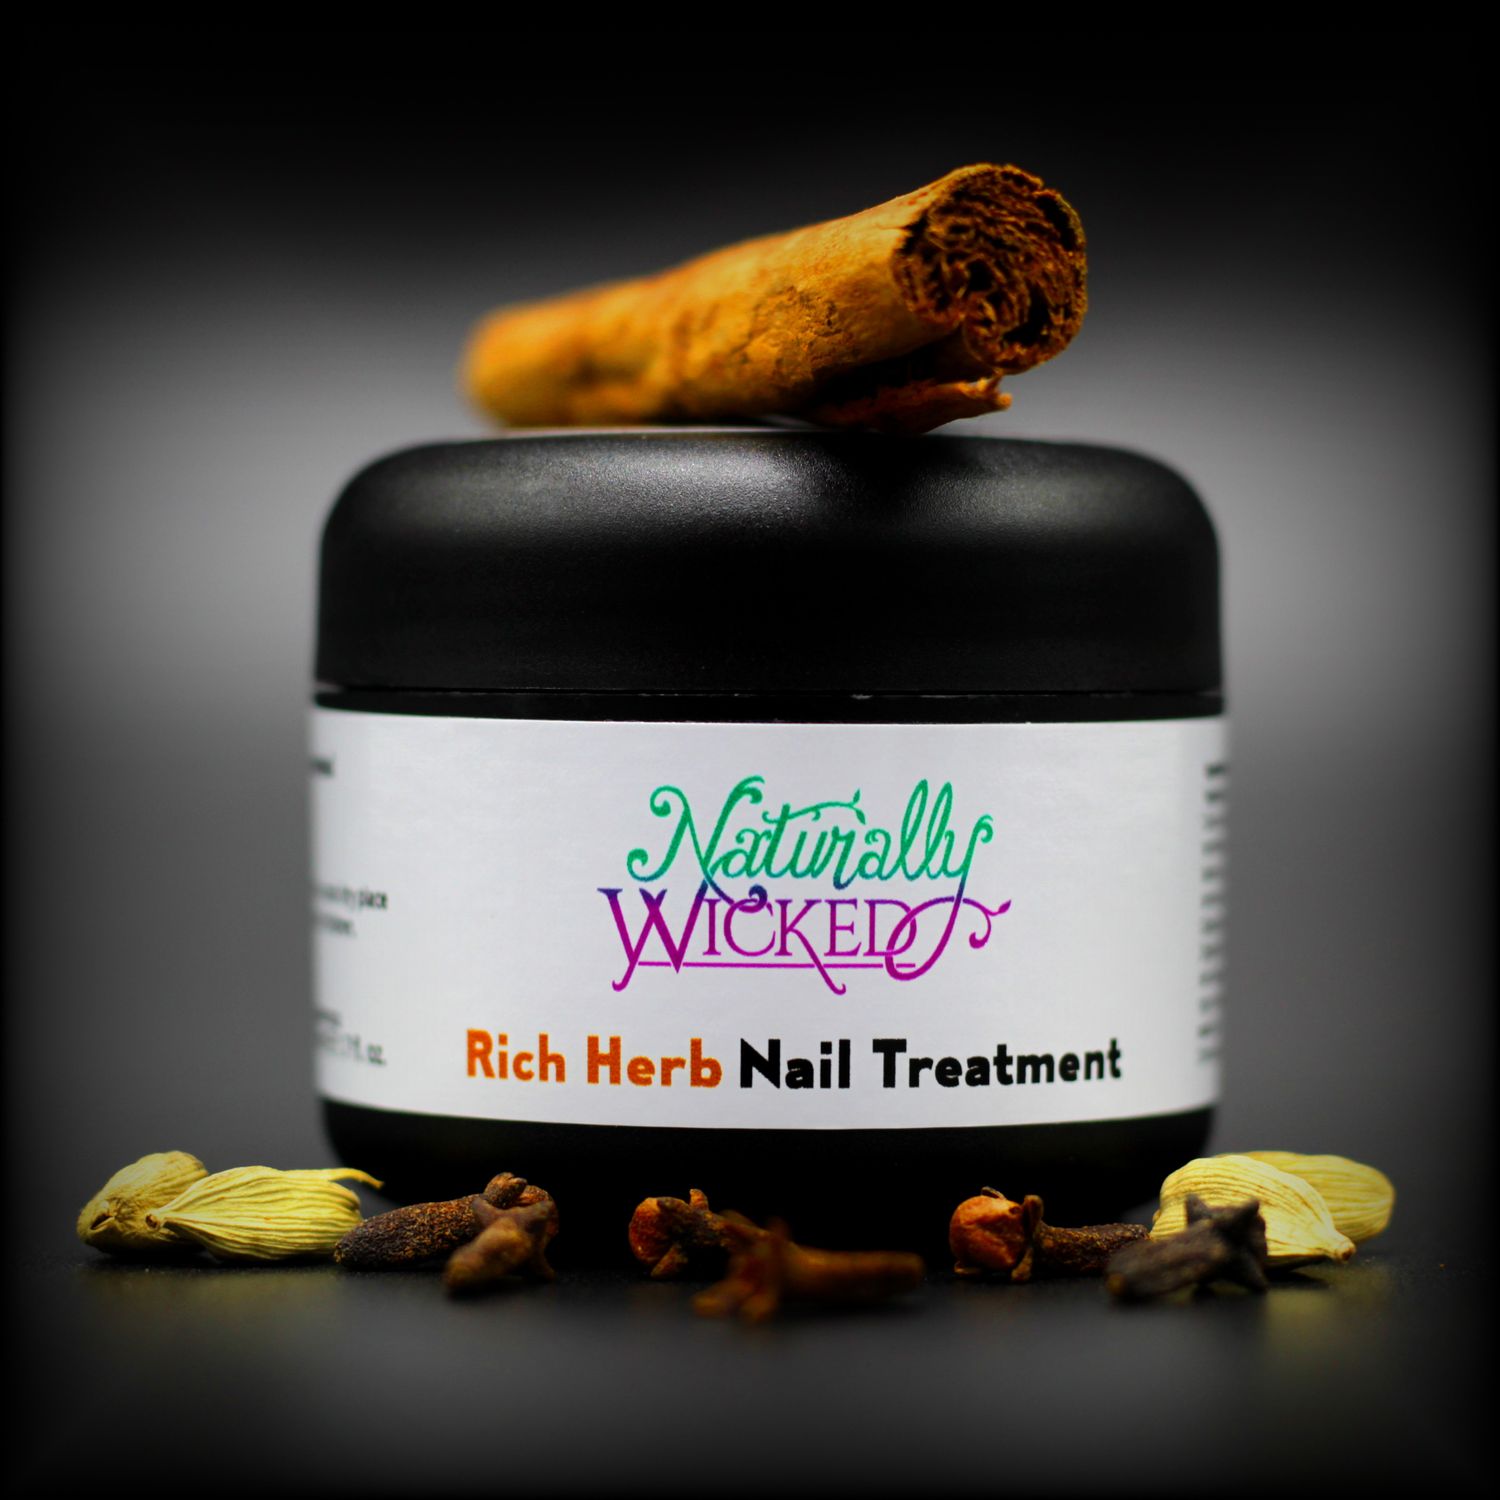 Naturally Wicked Rich Herb Nail Treatment Alongside Cloves & Cardamom With Cinnamon On Top - Step 2